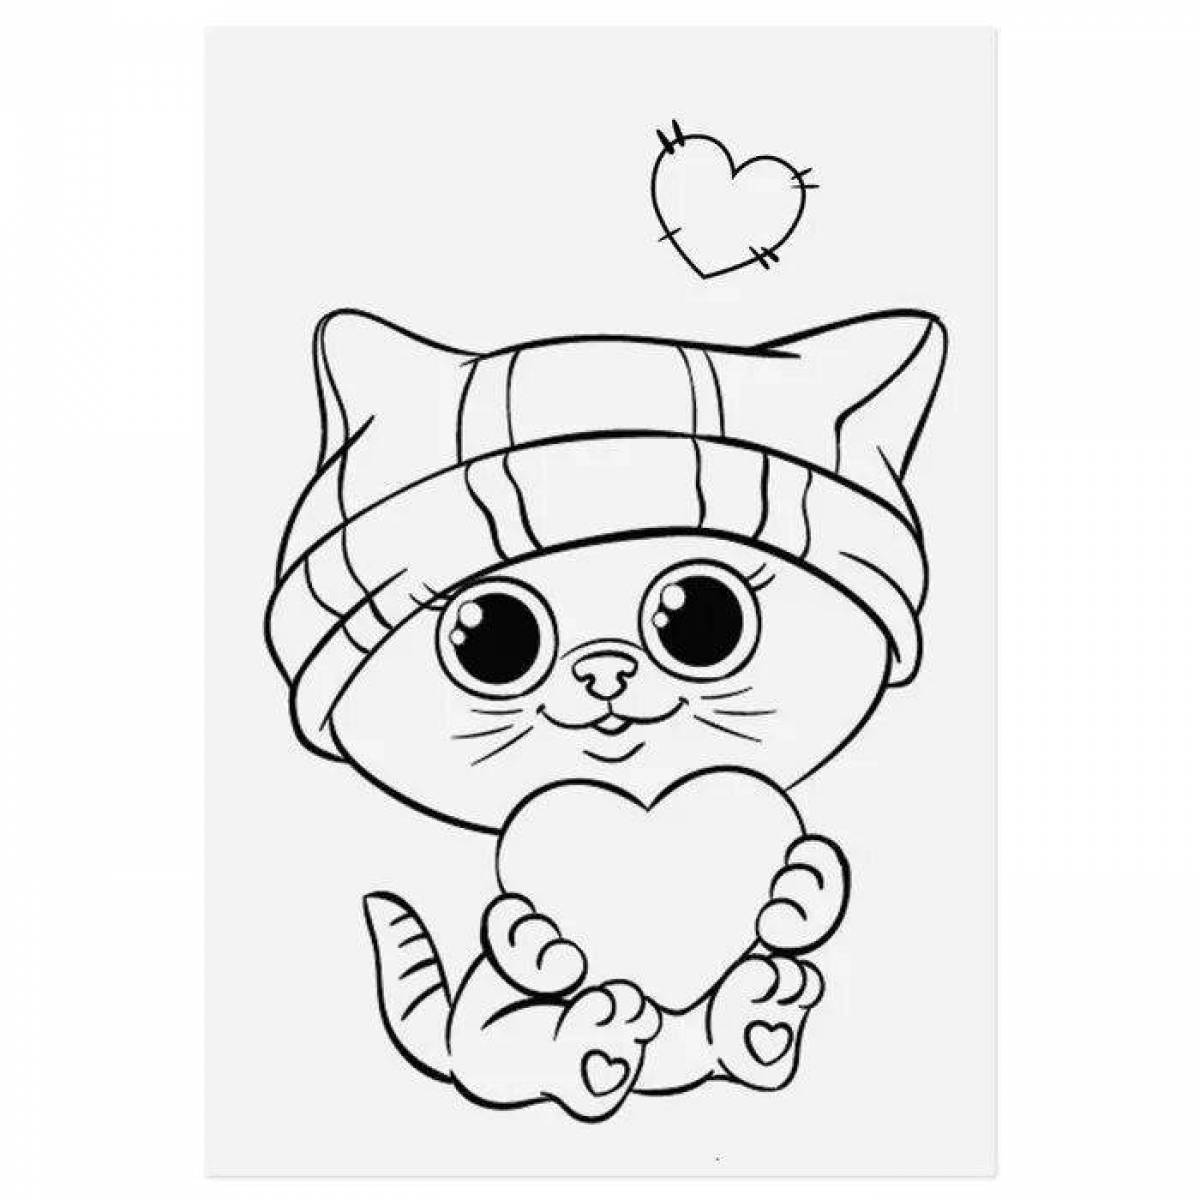 Exciting lily kitty coloring book